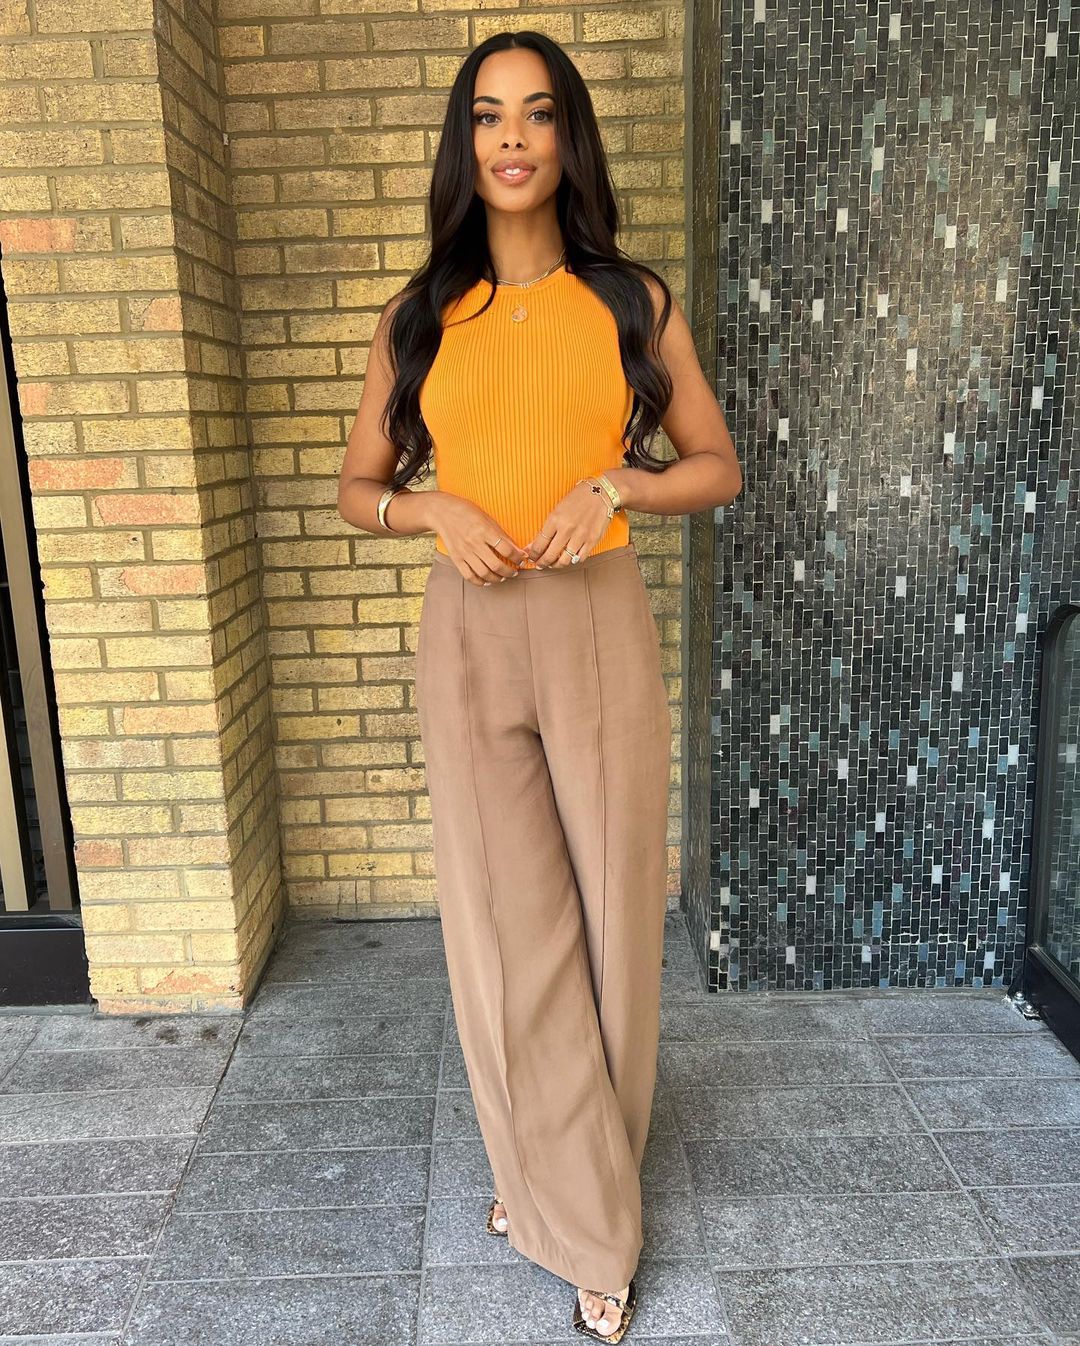 Rochelle Humes Mango Trousers: Rochelle Humes styles a pair of tan tailored trousers with an orange knit